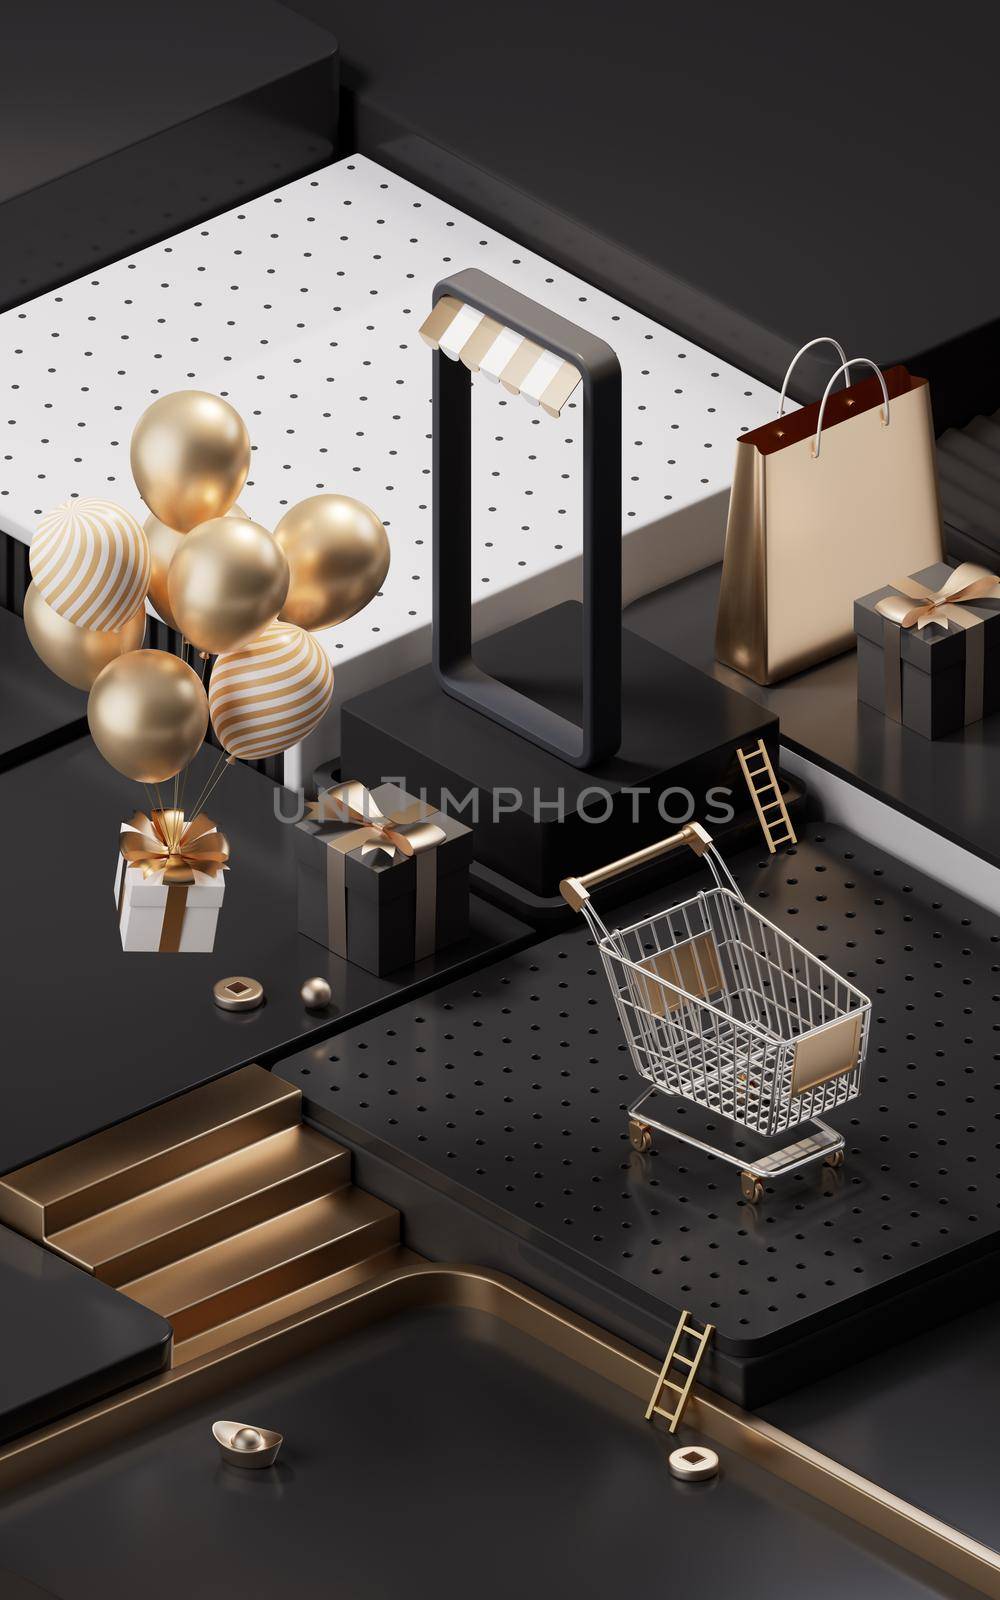 Shopping day activity with cube platform background, 3d rendering. Computer digital drawing.